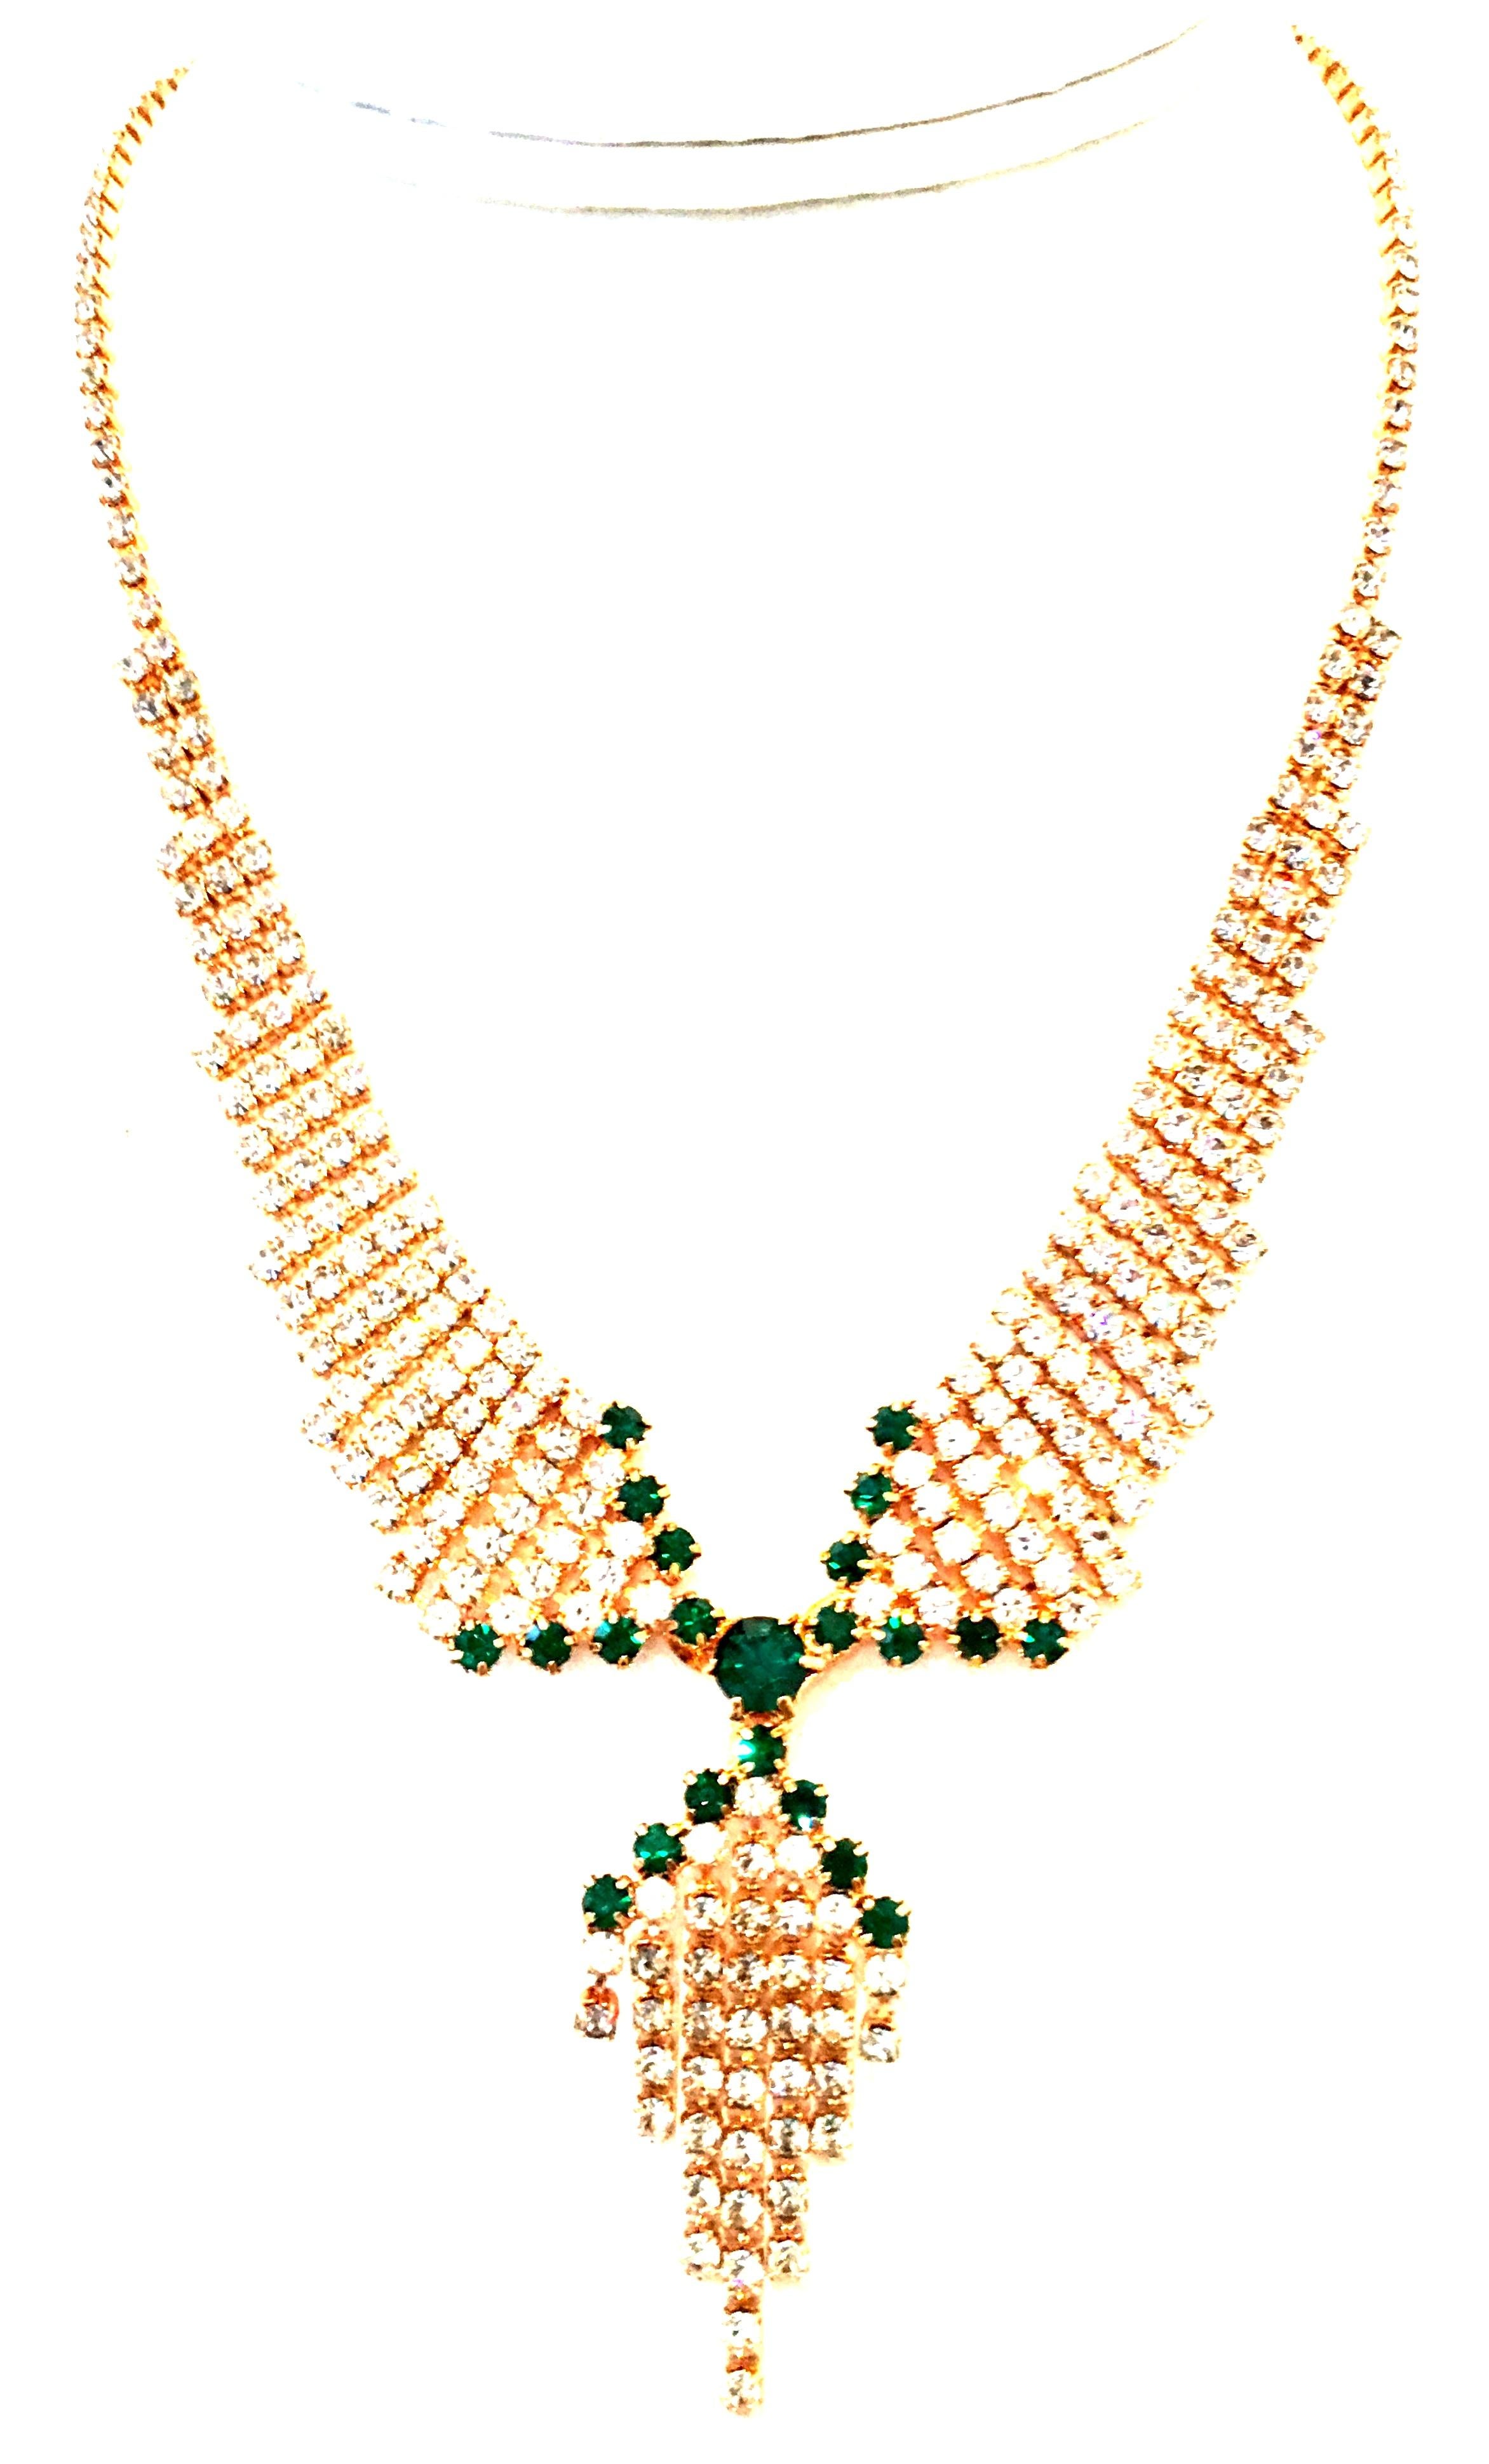 20th Century Gold Plate & Austrian Crystal Tassel Necklace. This finely crafted and festive gold plate with brilliant cut and faceted colorless and emerald green Austrian Crystal fancy set stones feature a “collar” style drop with fringe or tassel